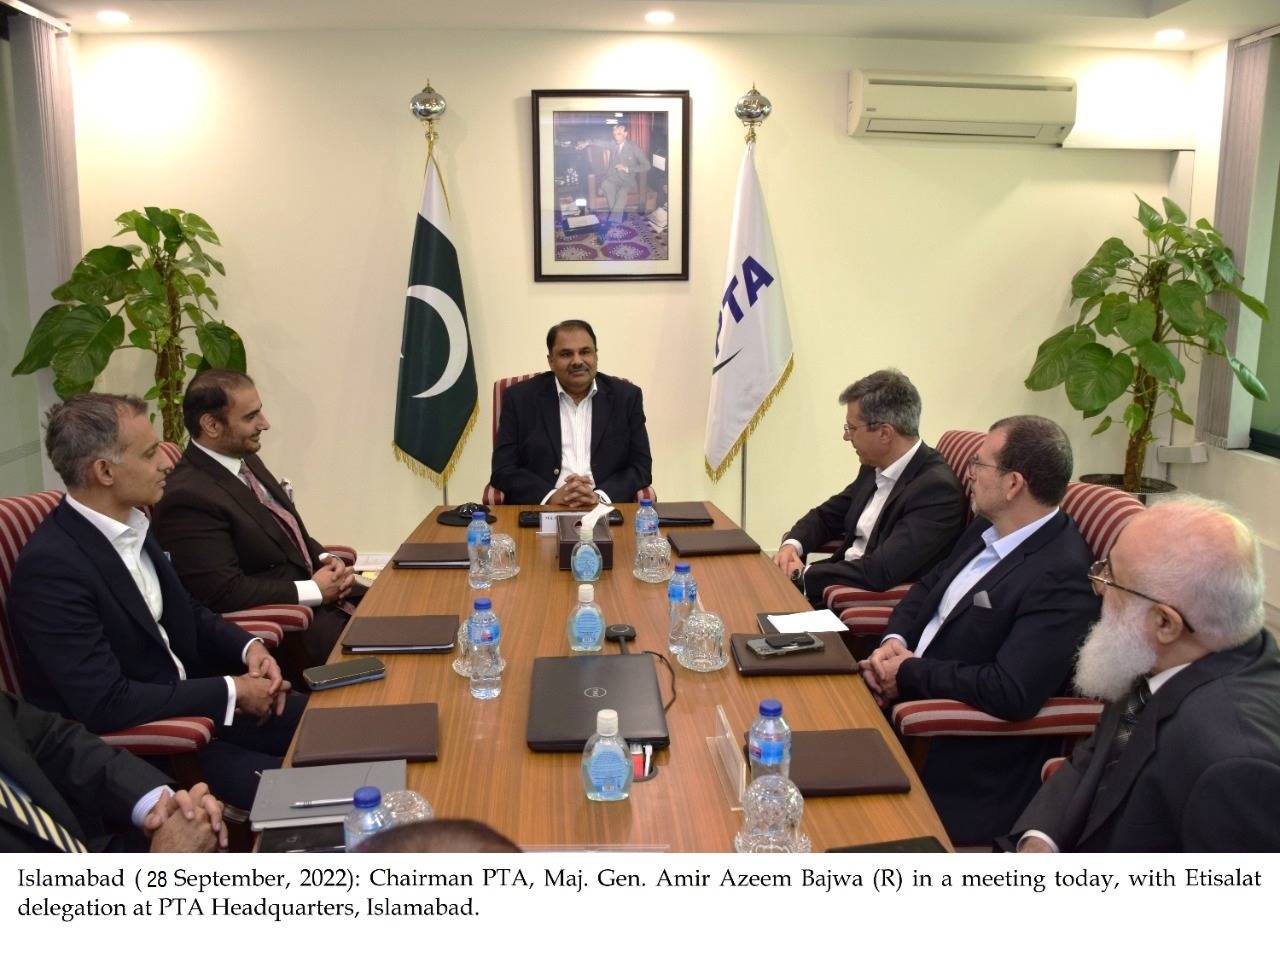 A delegation from Etisalat visited Pakistan Telecommunication Authority (PTA) Headquarters